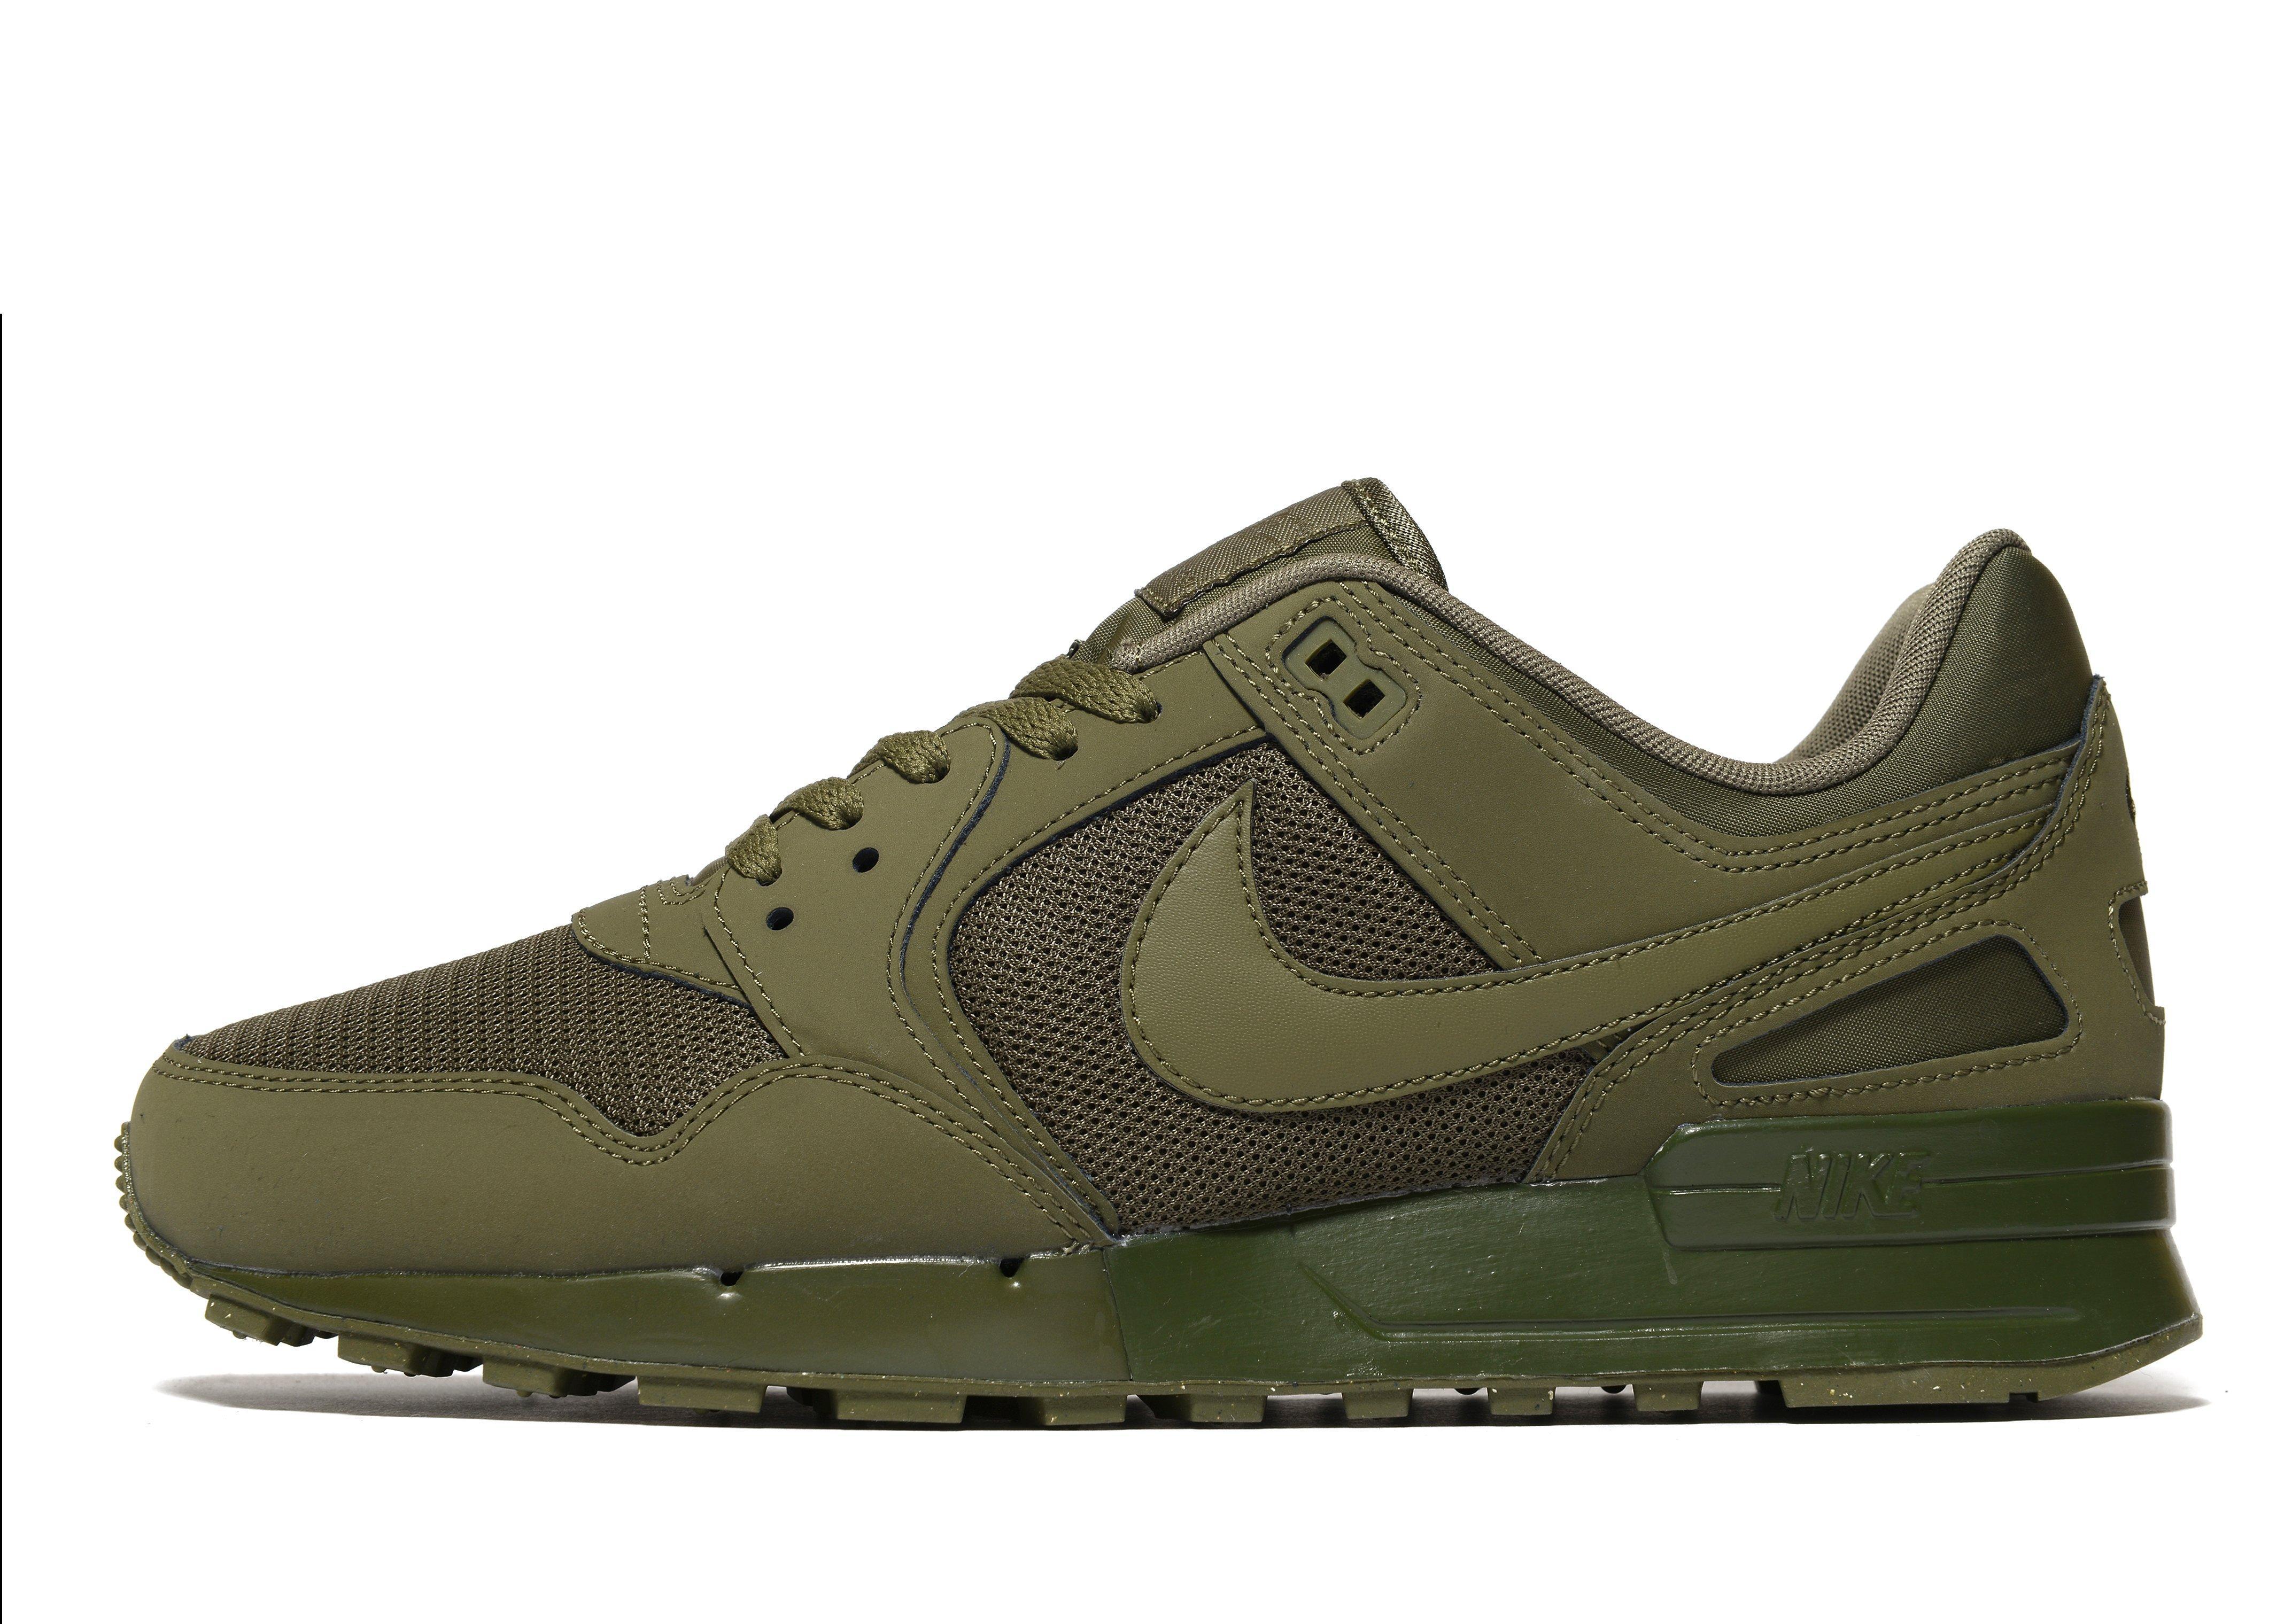 Nike Leather Pegasus 89 in Olive (Green) for Men - Lyst